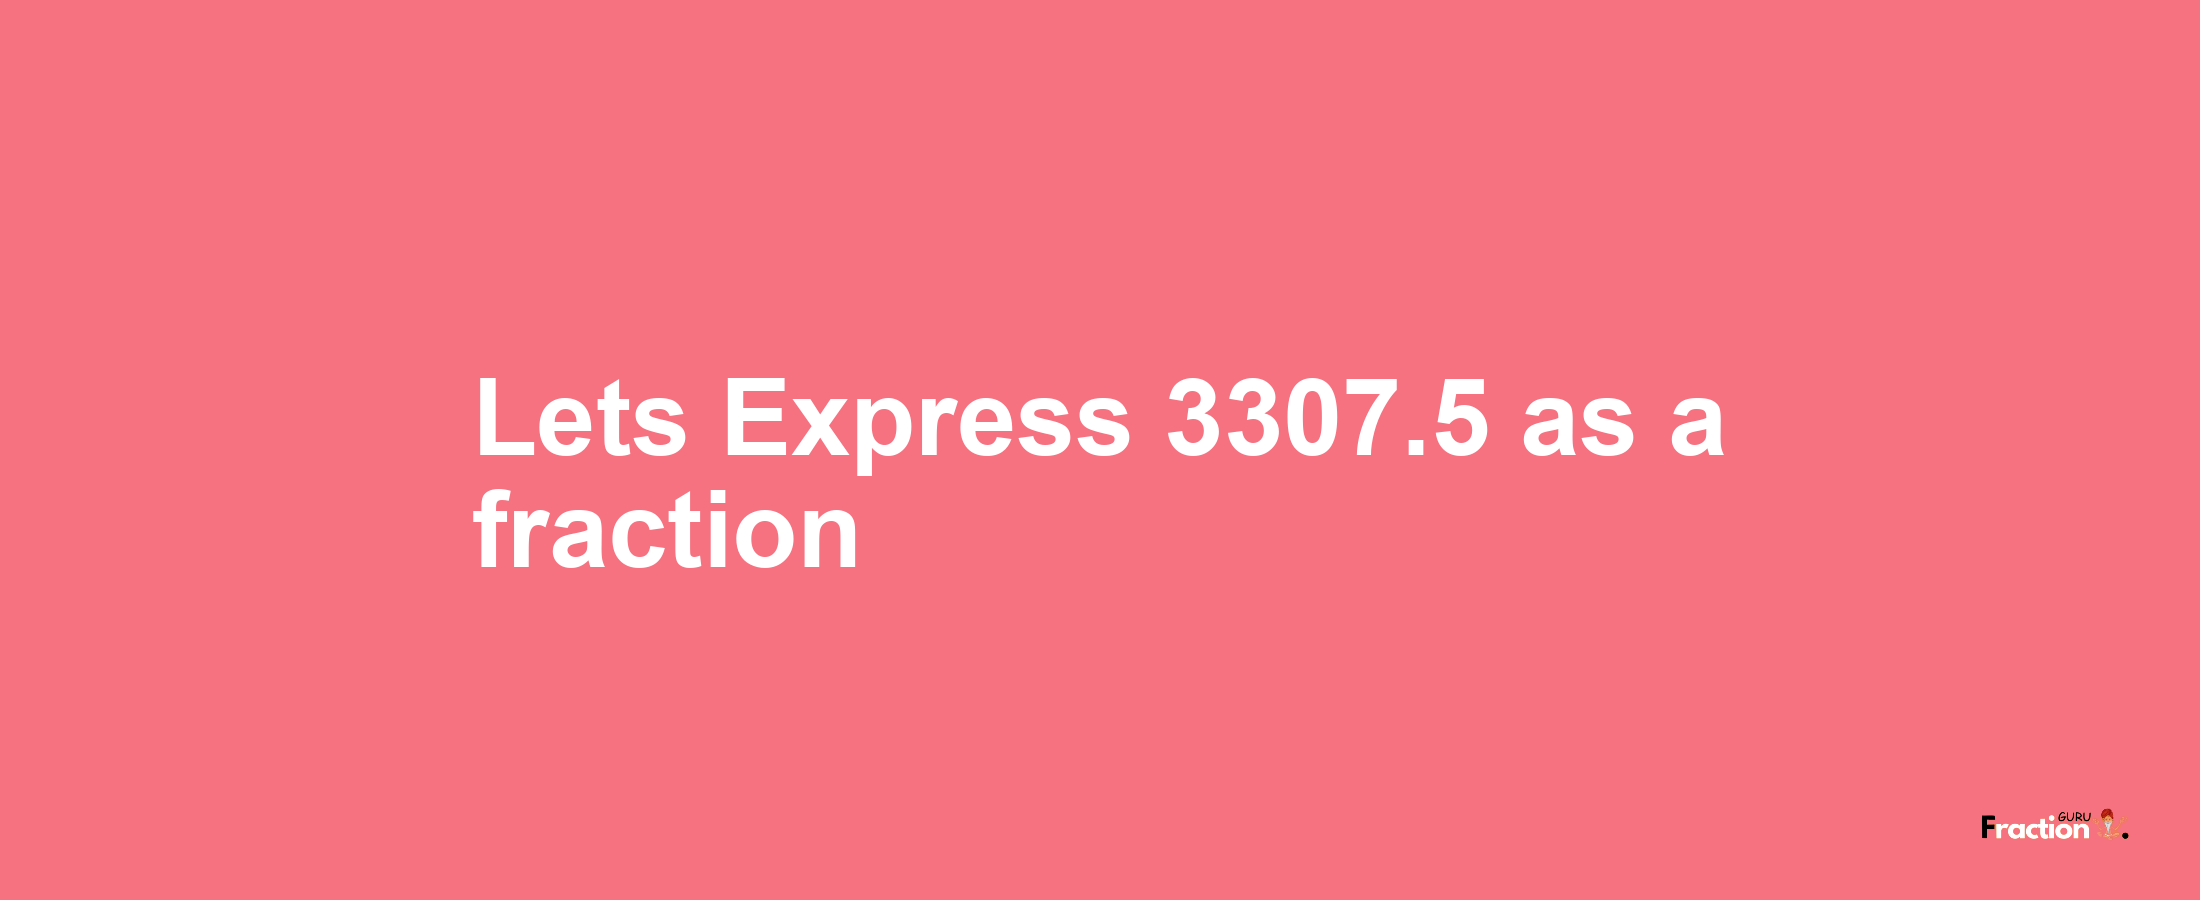 Lets Express 3307.5 as afraction